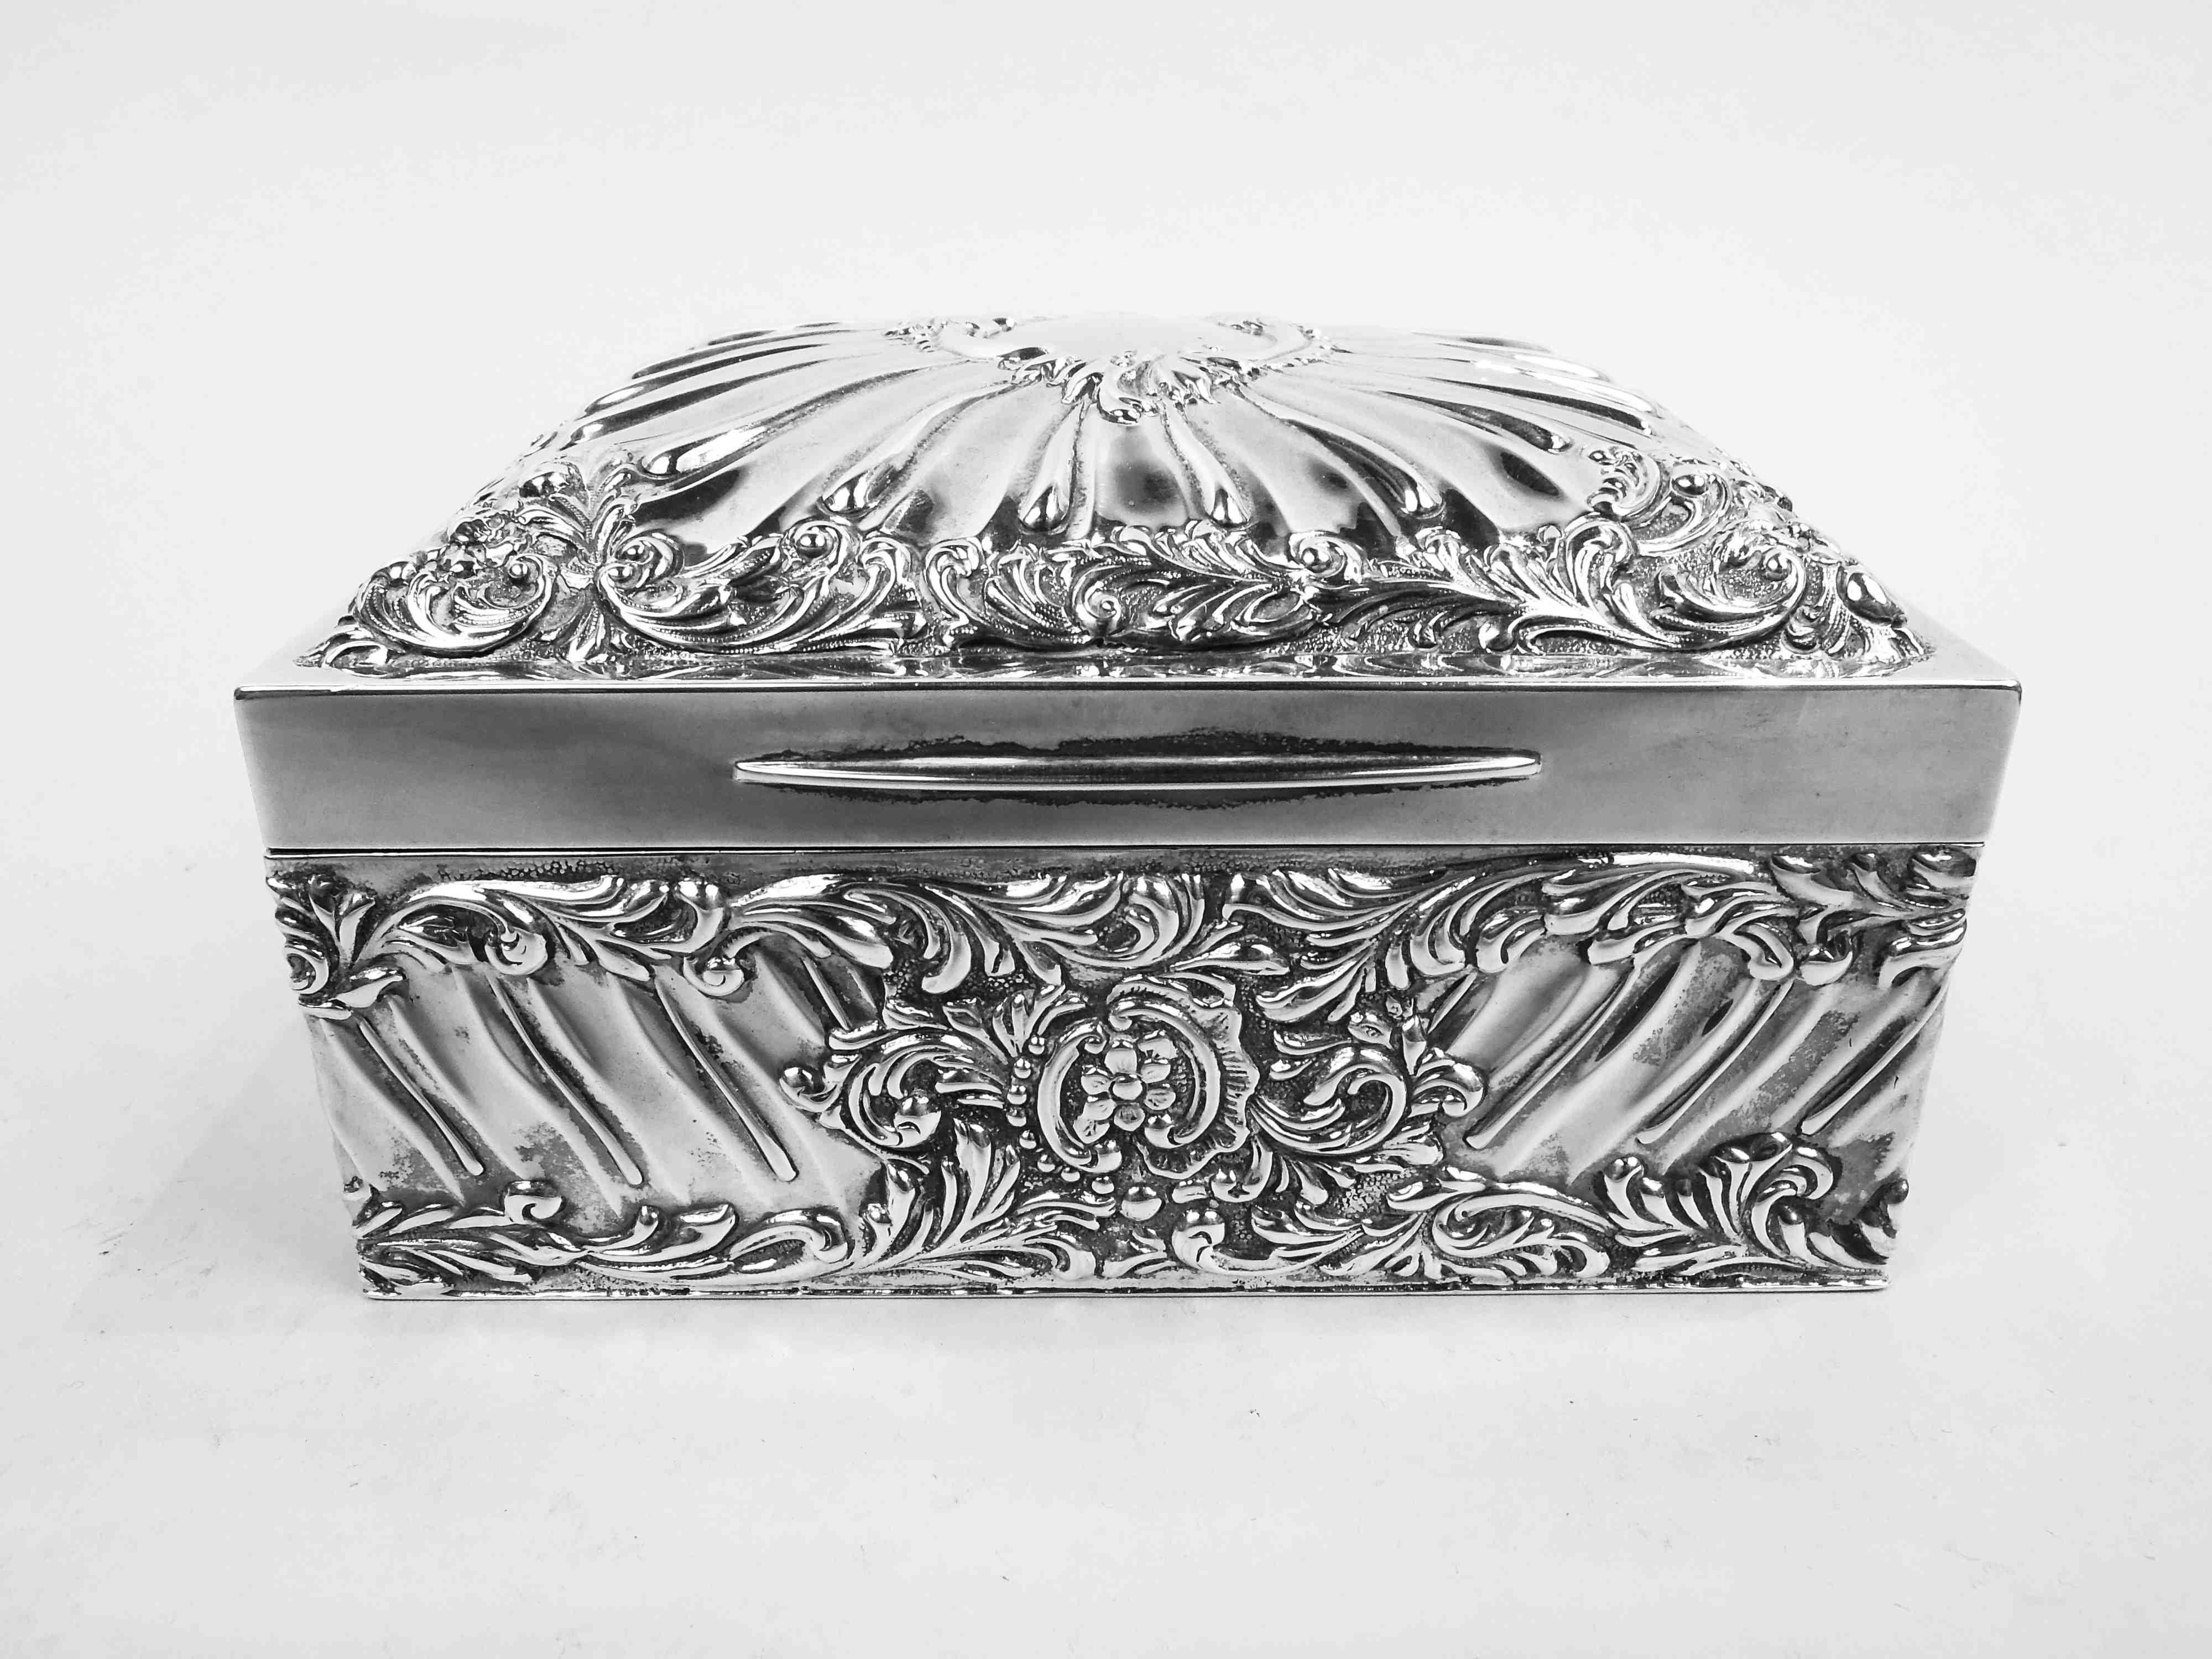 British Antique English Edwardian Classical Sterling Silver Jewelry Box, 1904